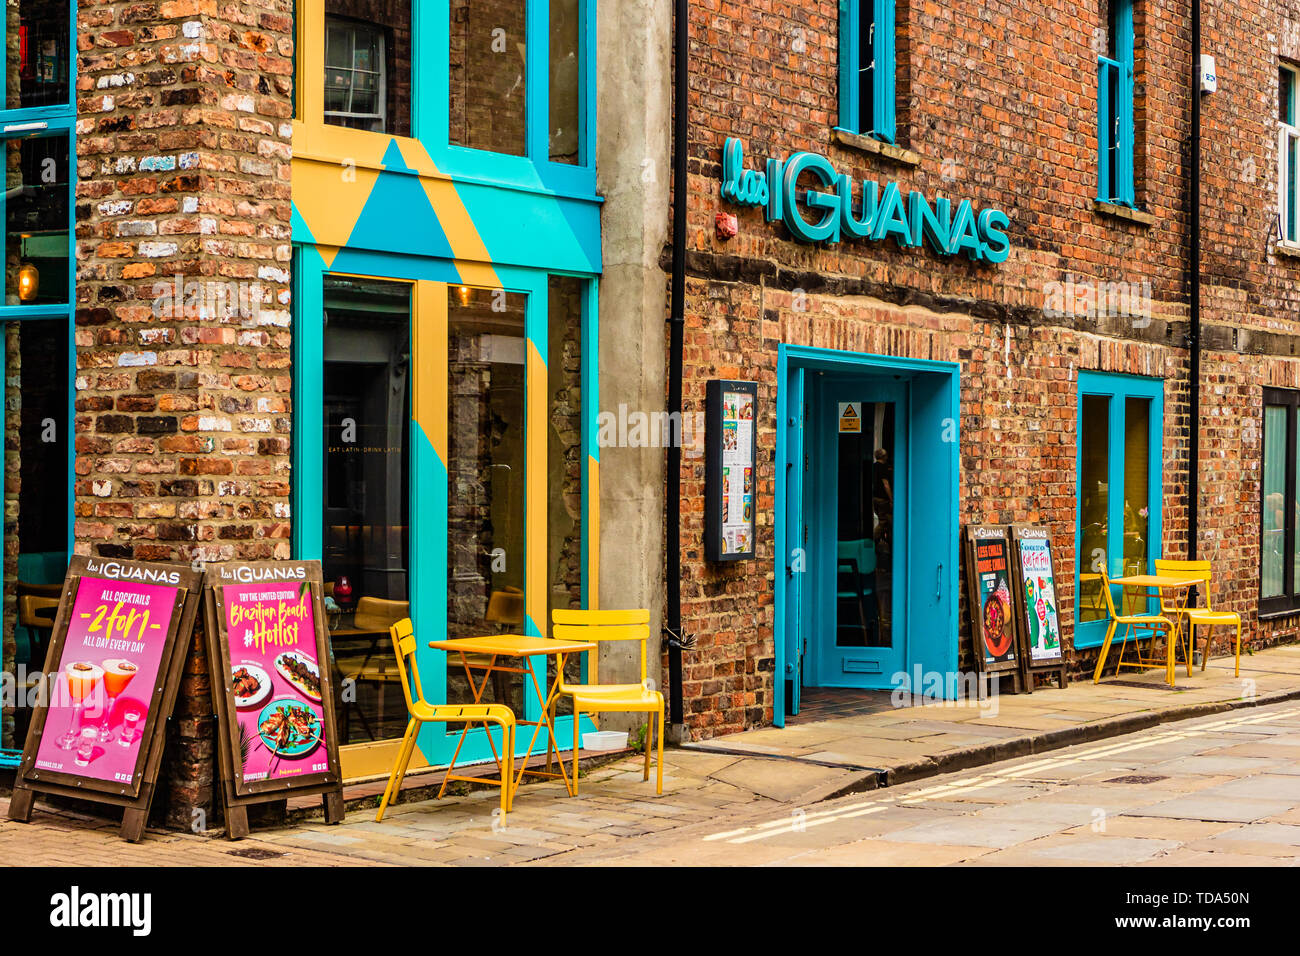 The colourful front entrance of a Las Iguanas restaurant, a chain specialising in Latin American dining, in the city of York, UK. August 2018. Stock Photo